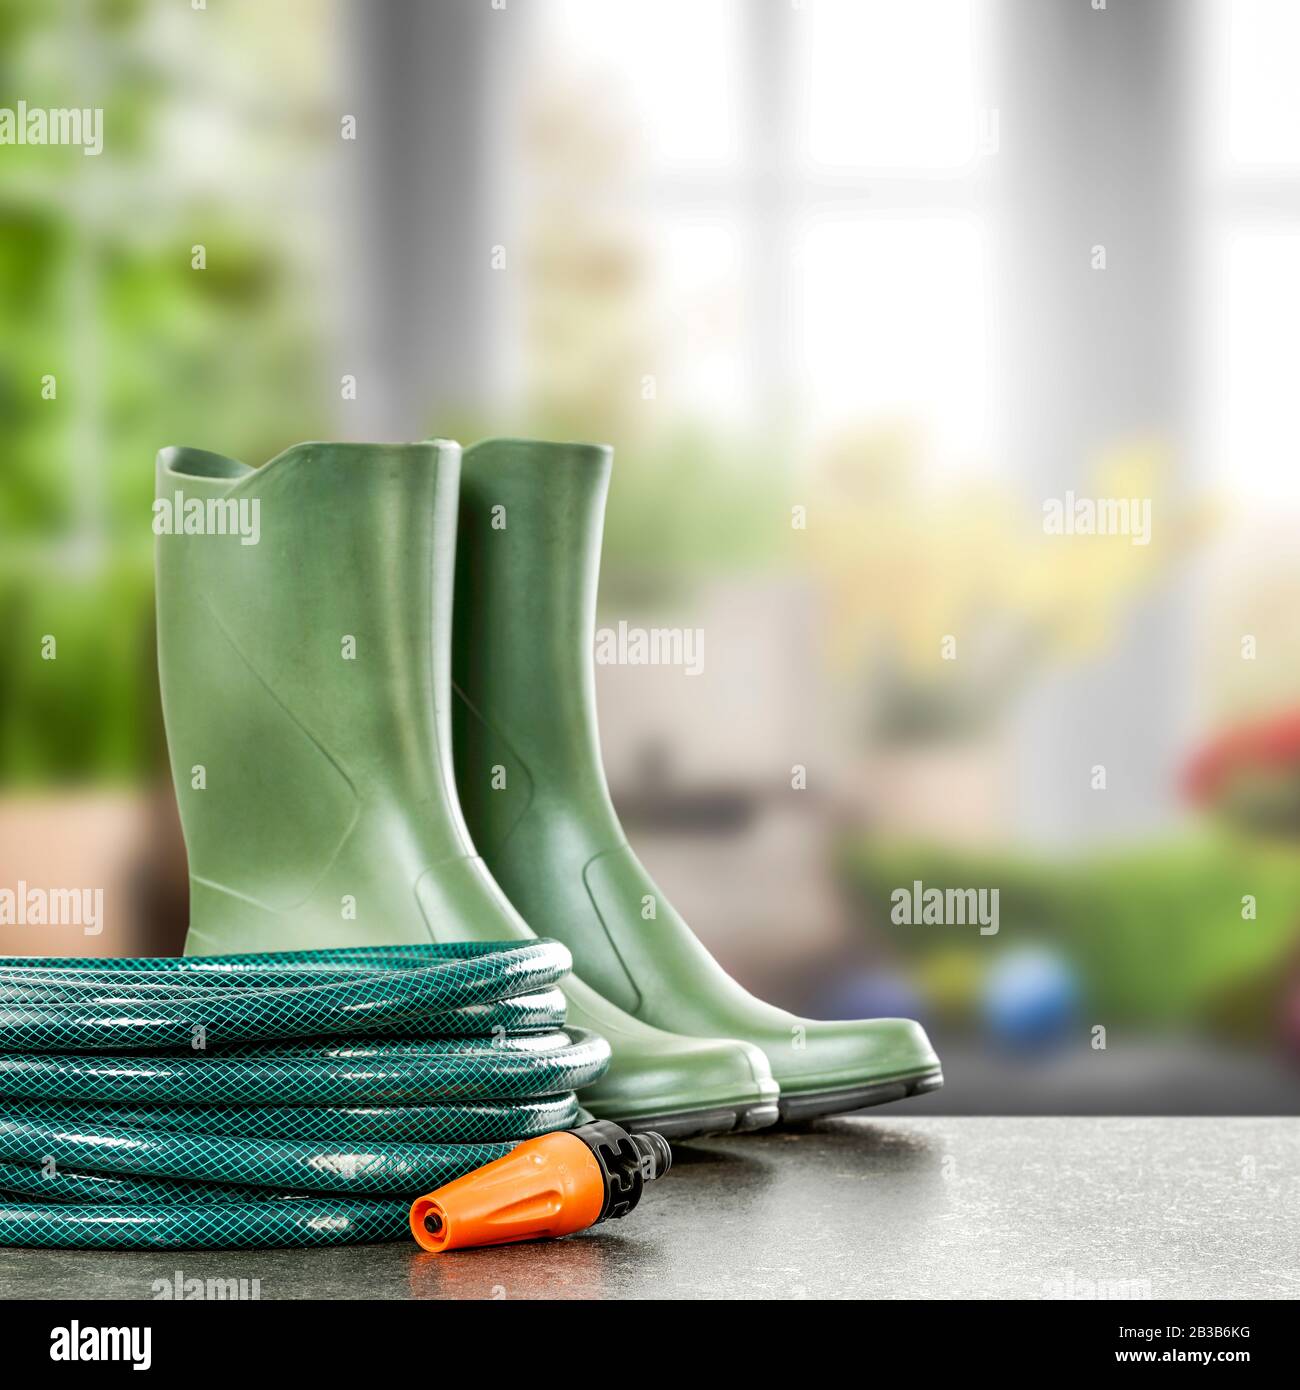 Spring time in the garden. Gardening equipment with blurred idyllic rural picture background outside the window. Stock Photo